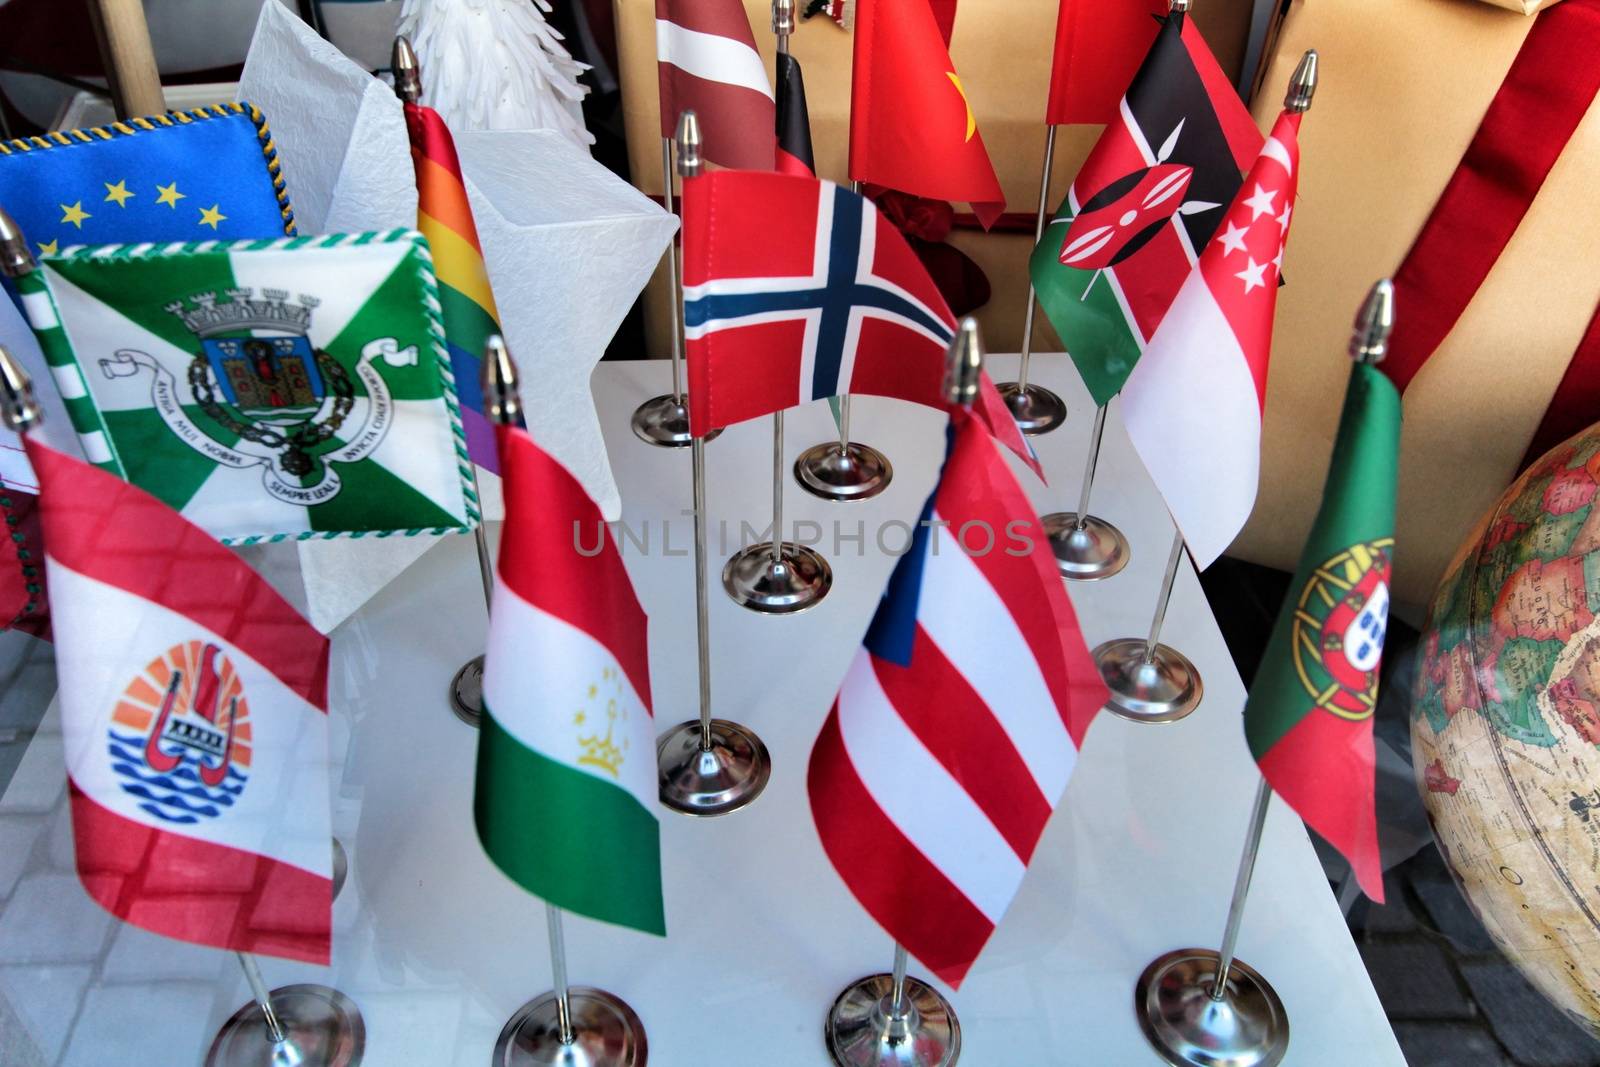 Miniature governmental flags of different countries in a showcase in Portugal